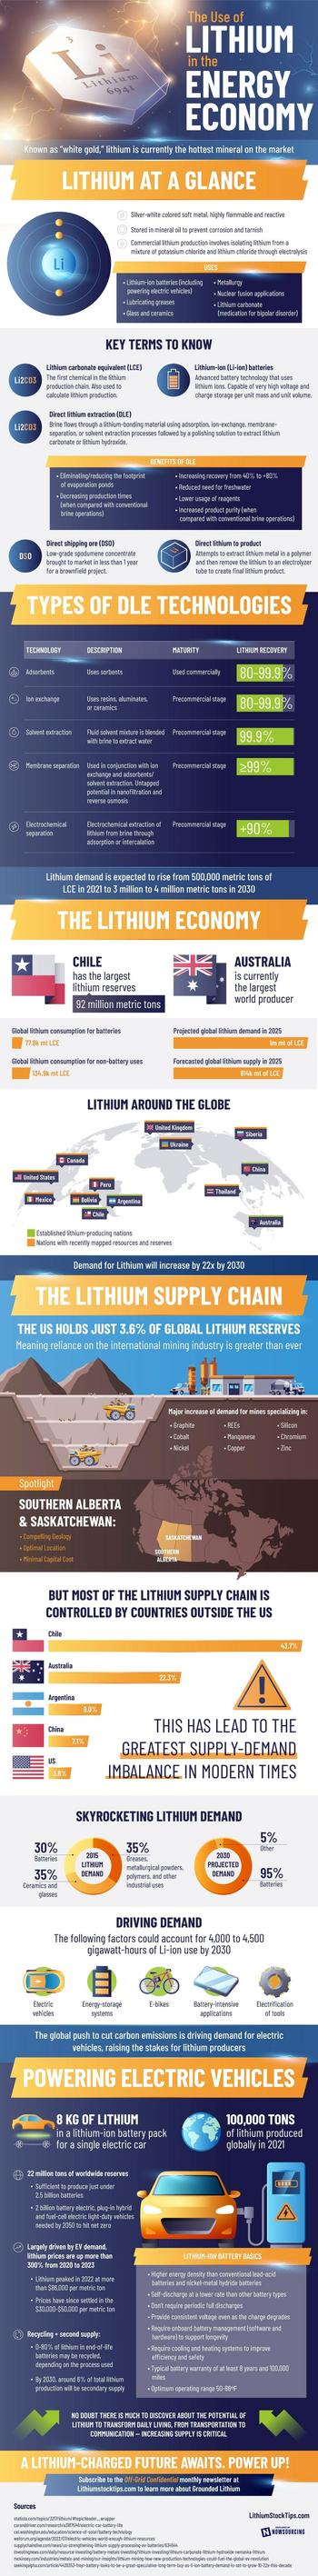 A Look At The Lithium Economy And Its Impact On Electric Vehicles: https://www.valuewalk.com/wp-content/uploads/2023/06/Lithium-In-The-Energy-Economy-IG.jpg